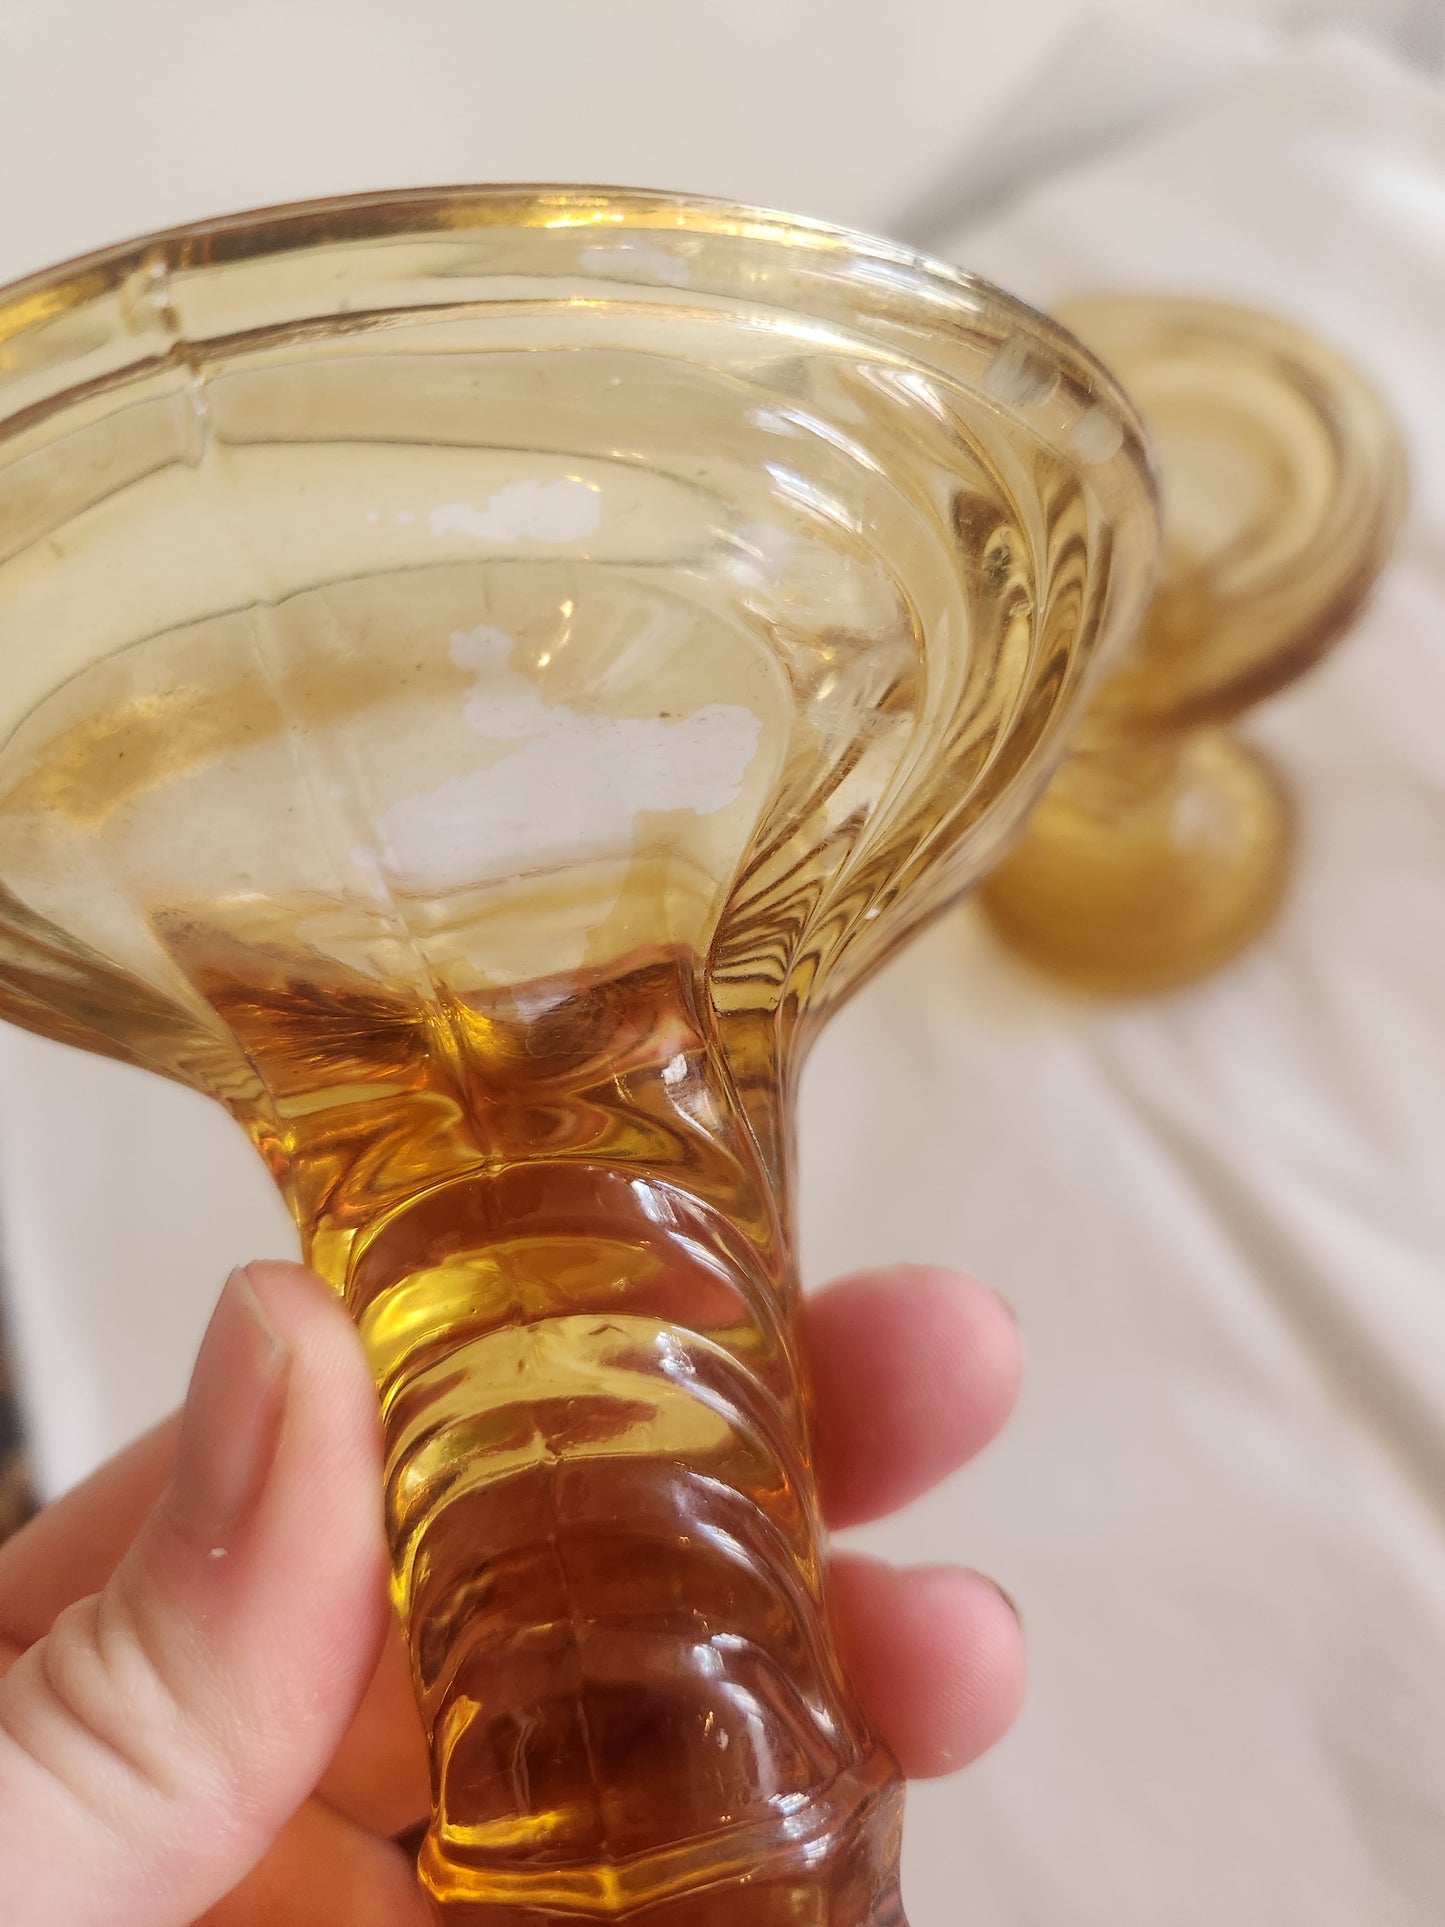 Amber Glass Candle Holders